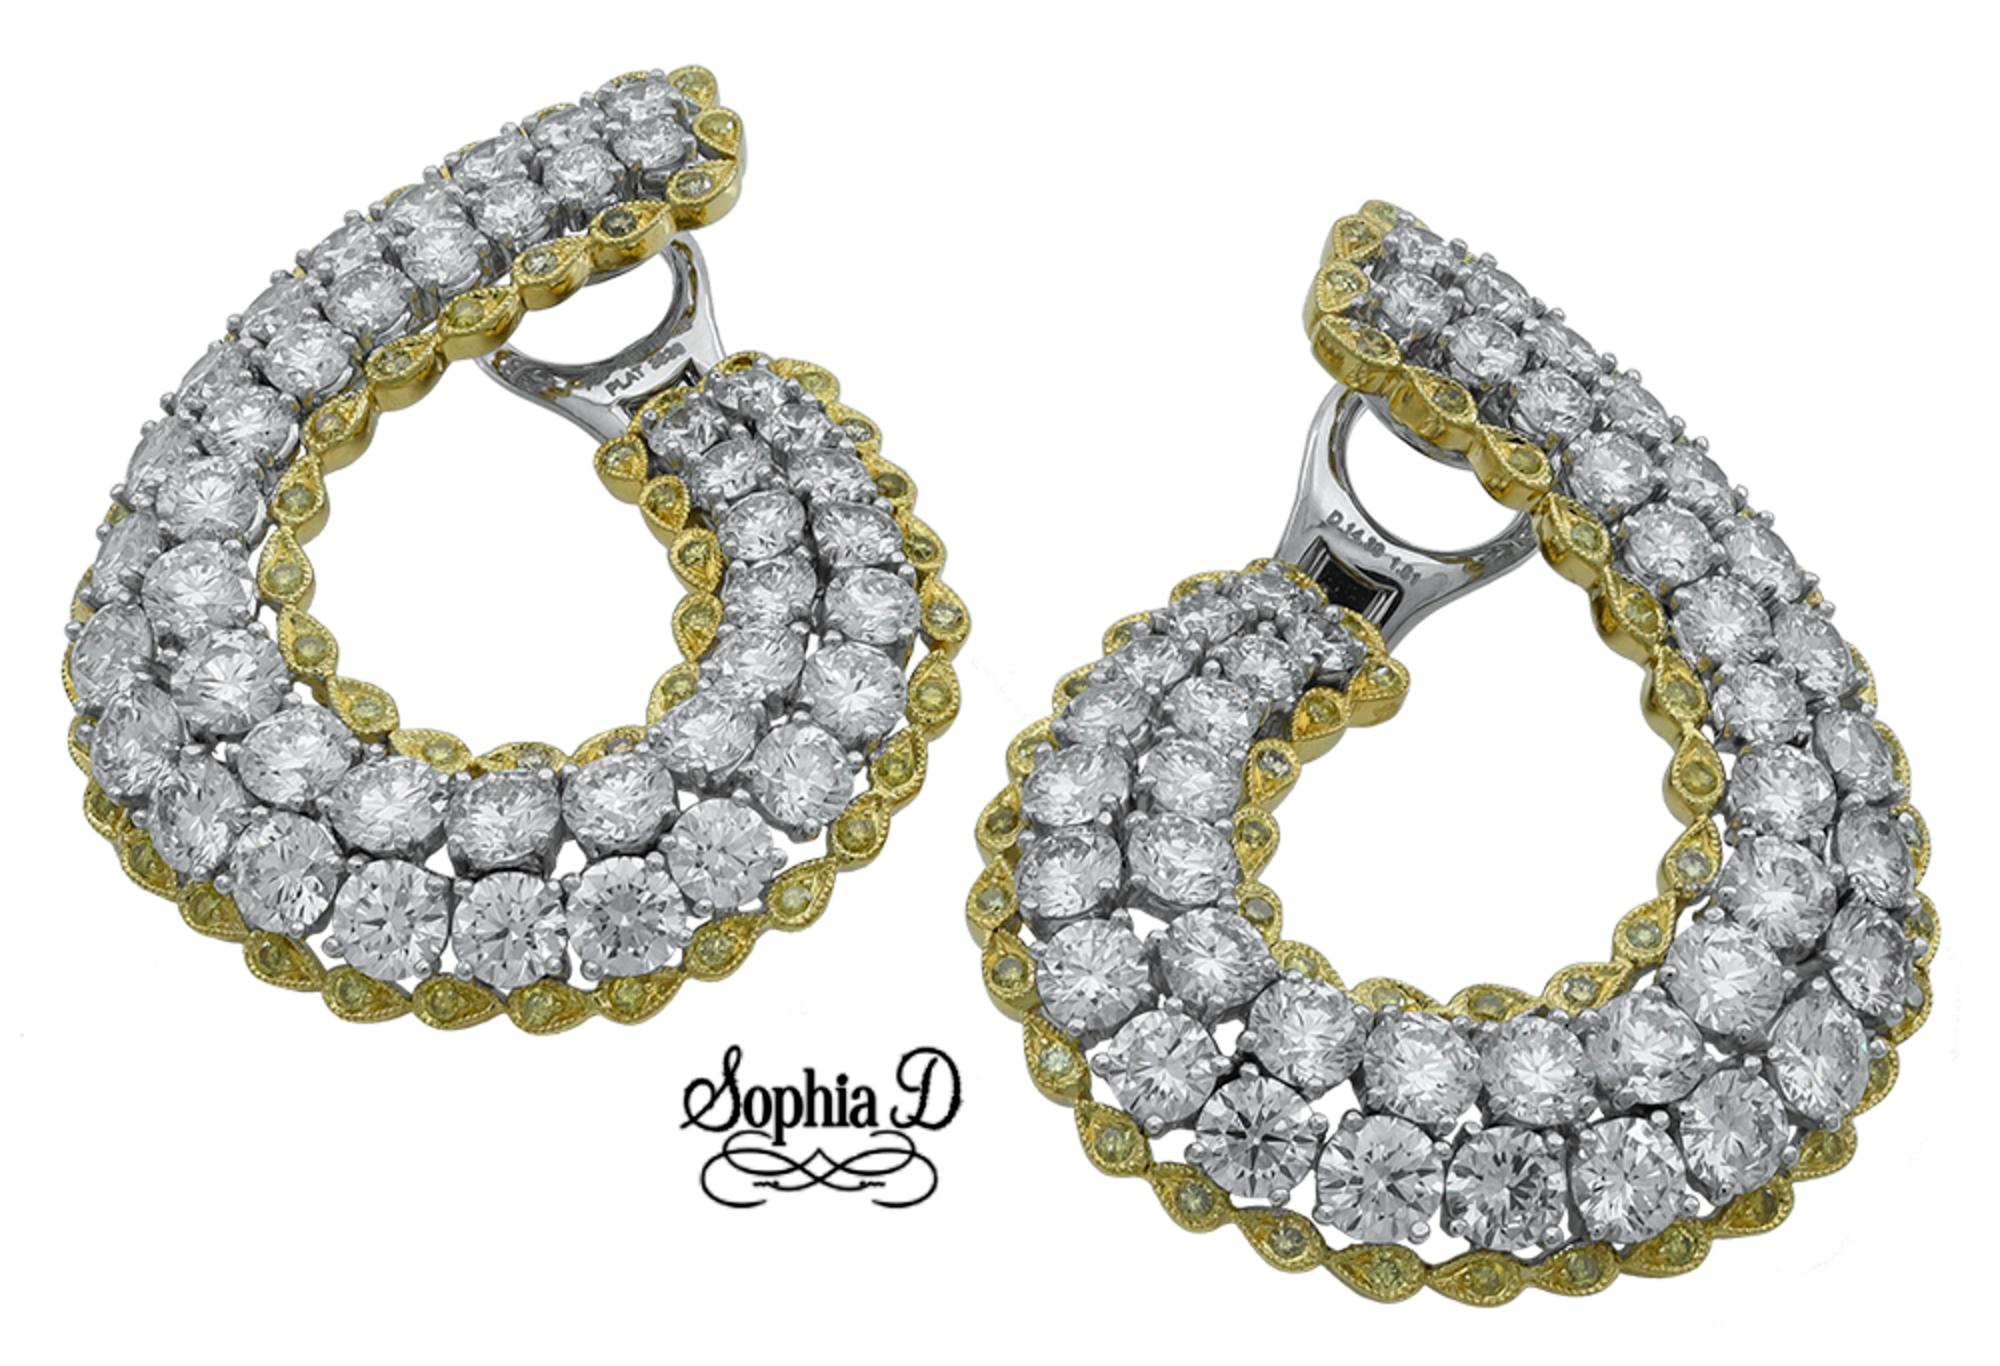 Gorgeously designed by Sophia D, this diamond and yellow sapphire earrings set in platinum is with round cut diamonds weighing 14.39 carats and yellow sapphires weighing 1.01 carats.

Sophia D by Joseph Dardashti LTD has been known worldwide for 35